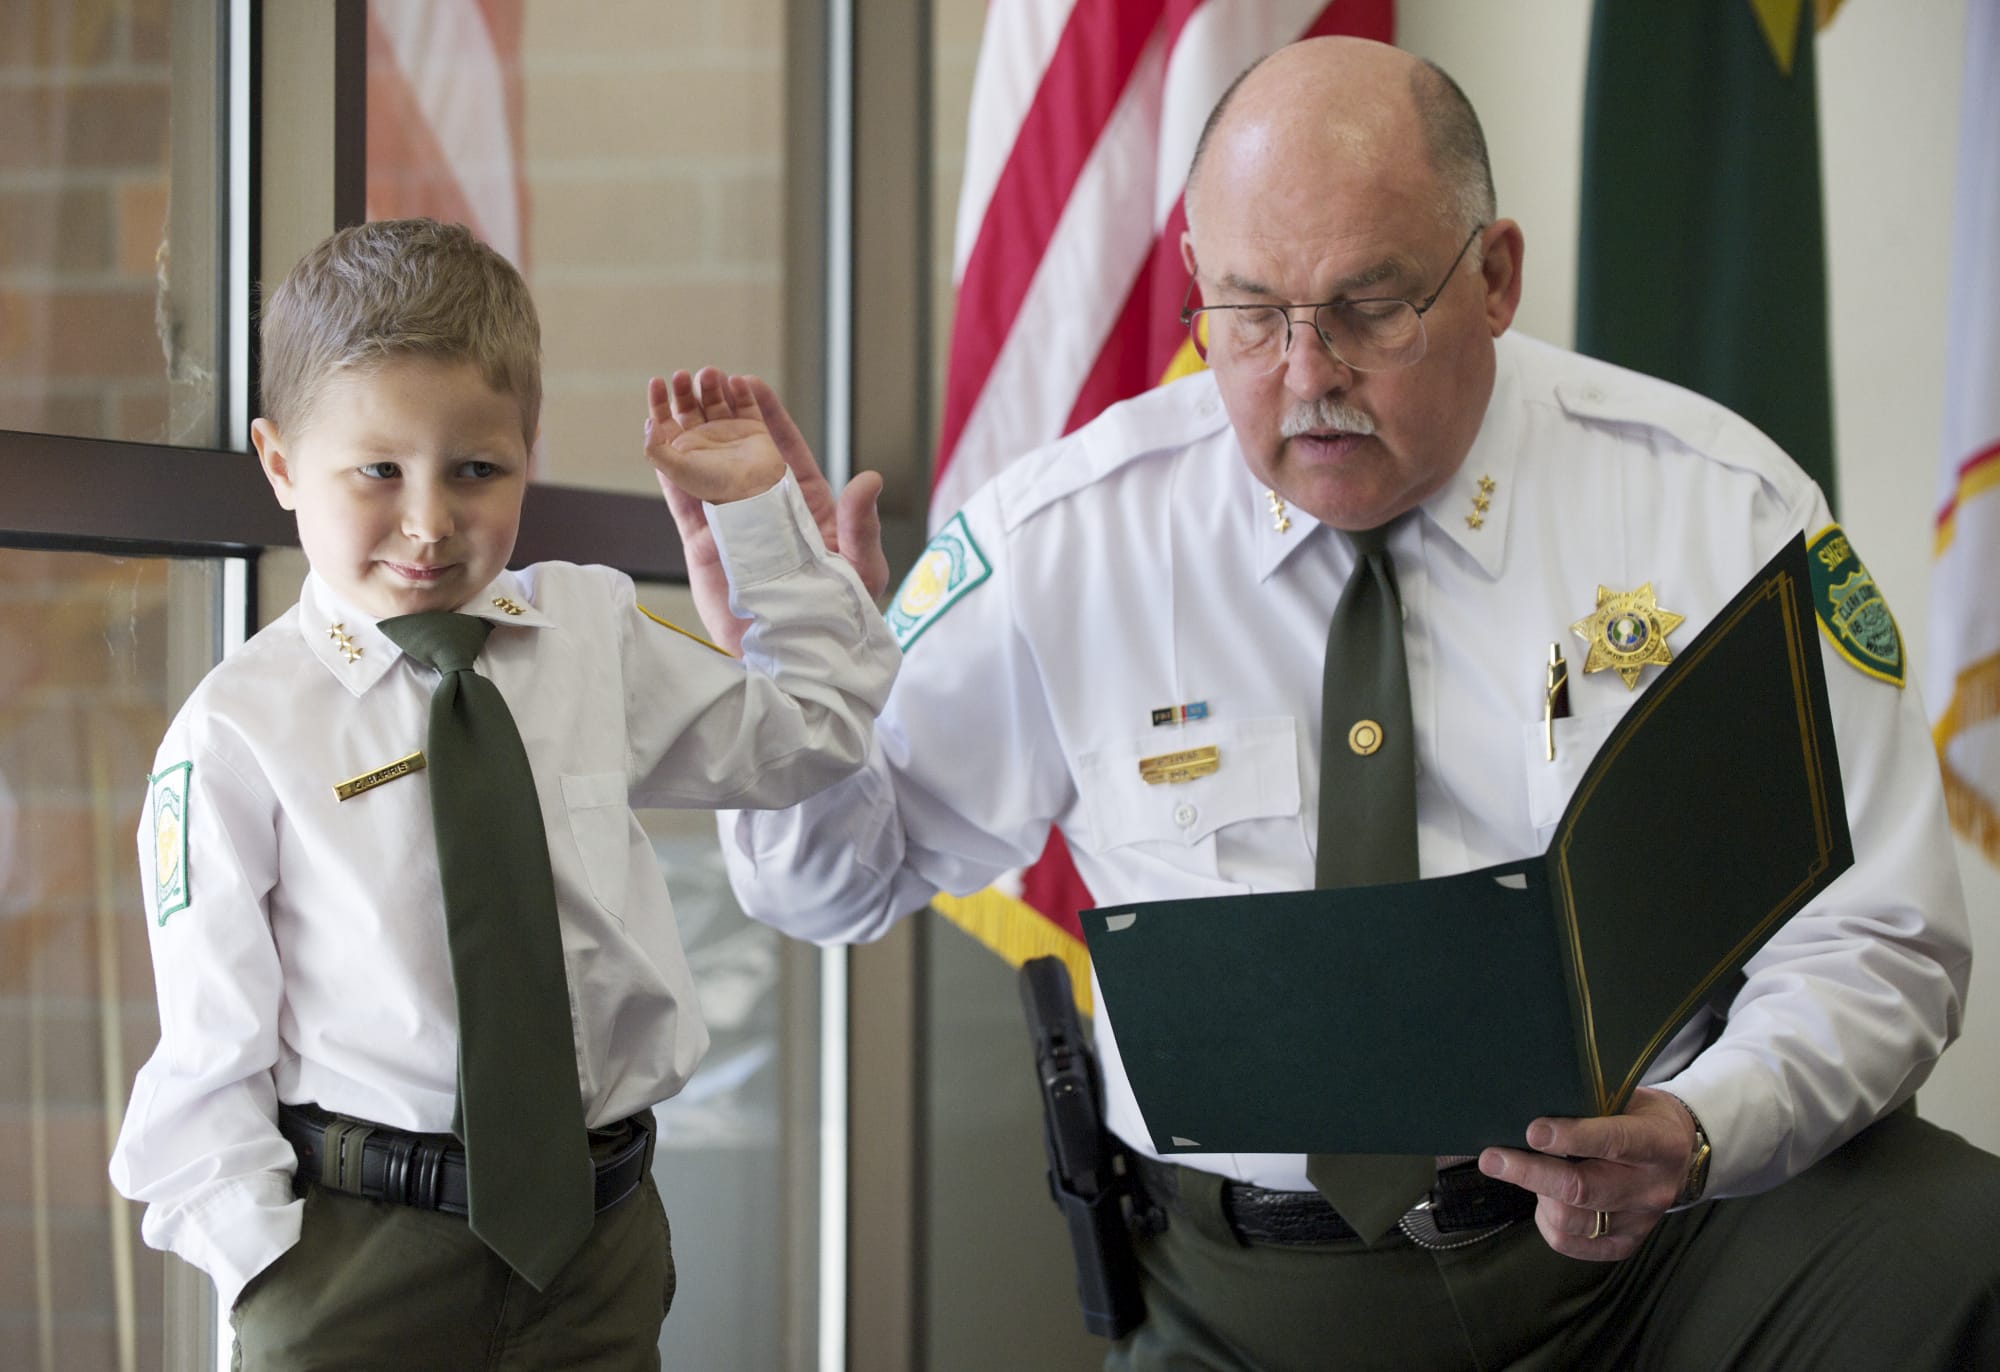 Carter Harris, 4, takes the oath of office from Clark County Sheriff Garry Lucas as he is named sheriff for a day on Wednesday.